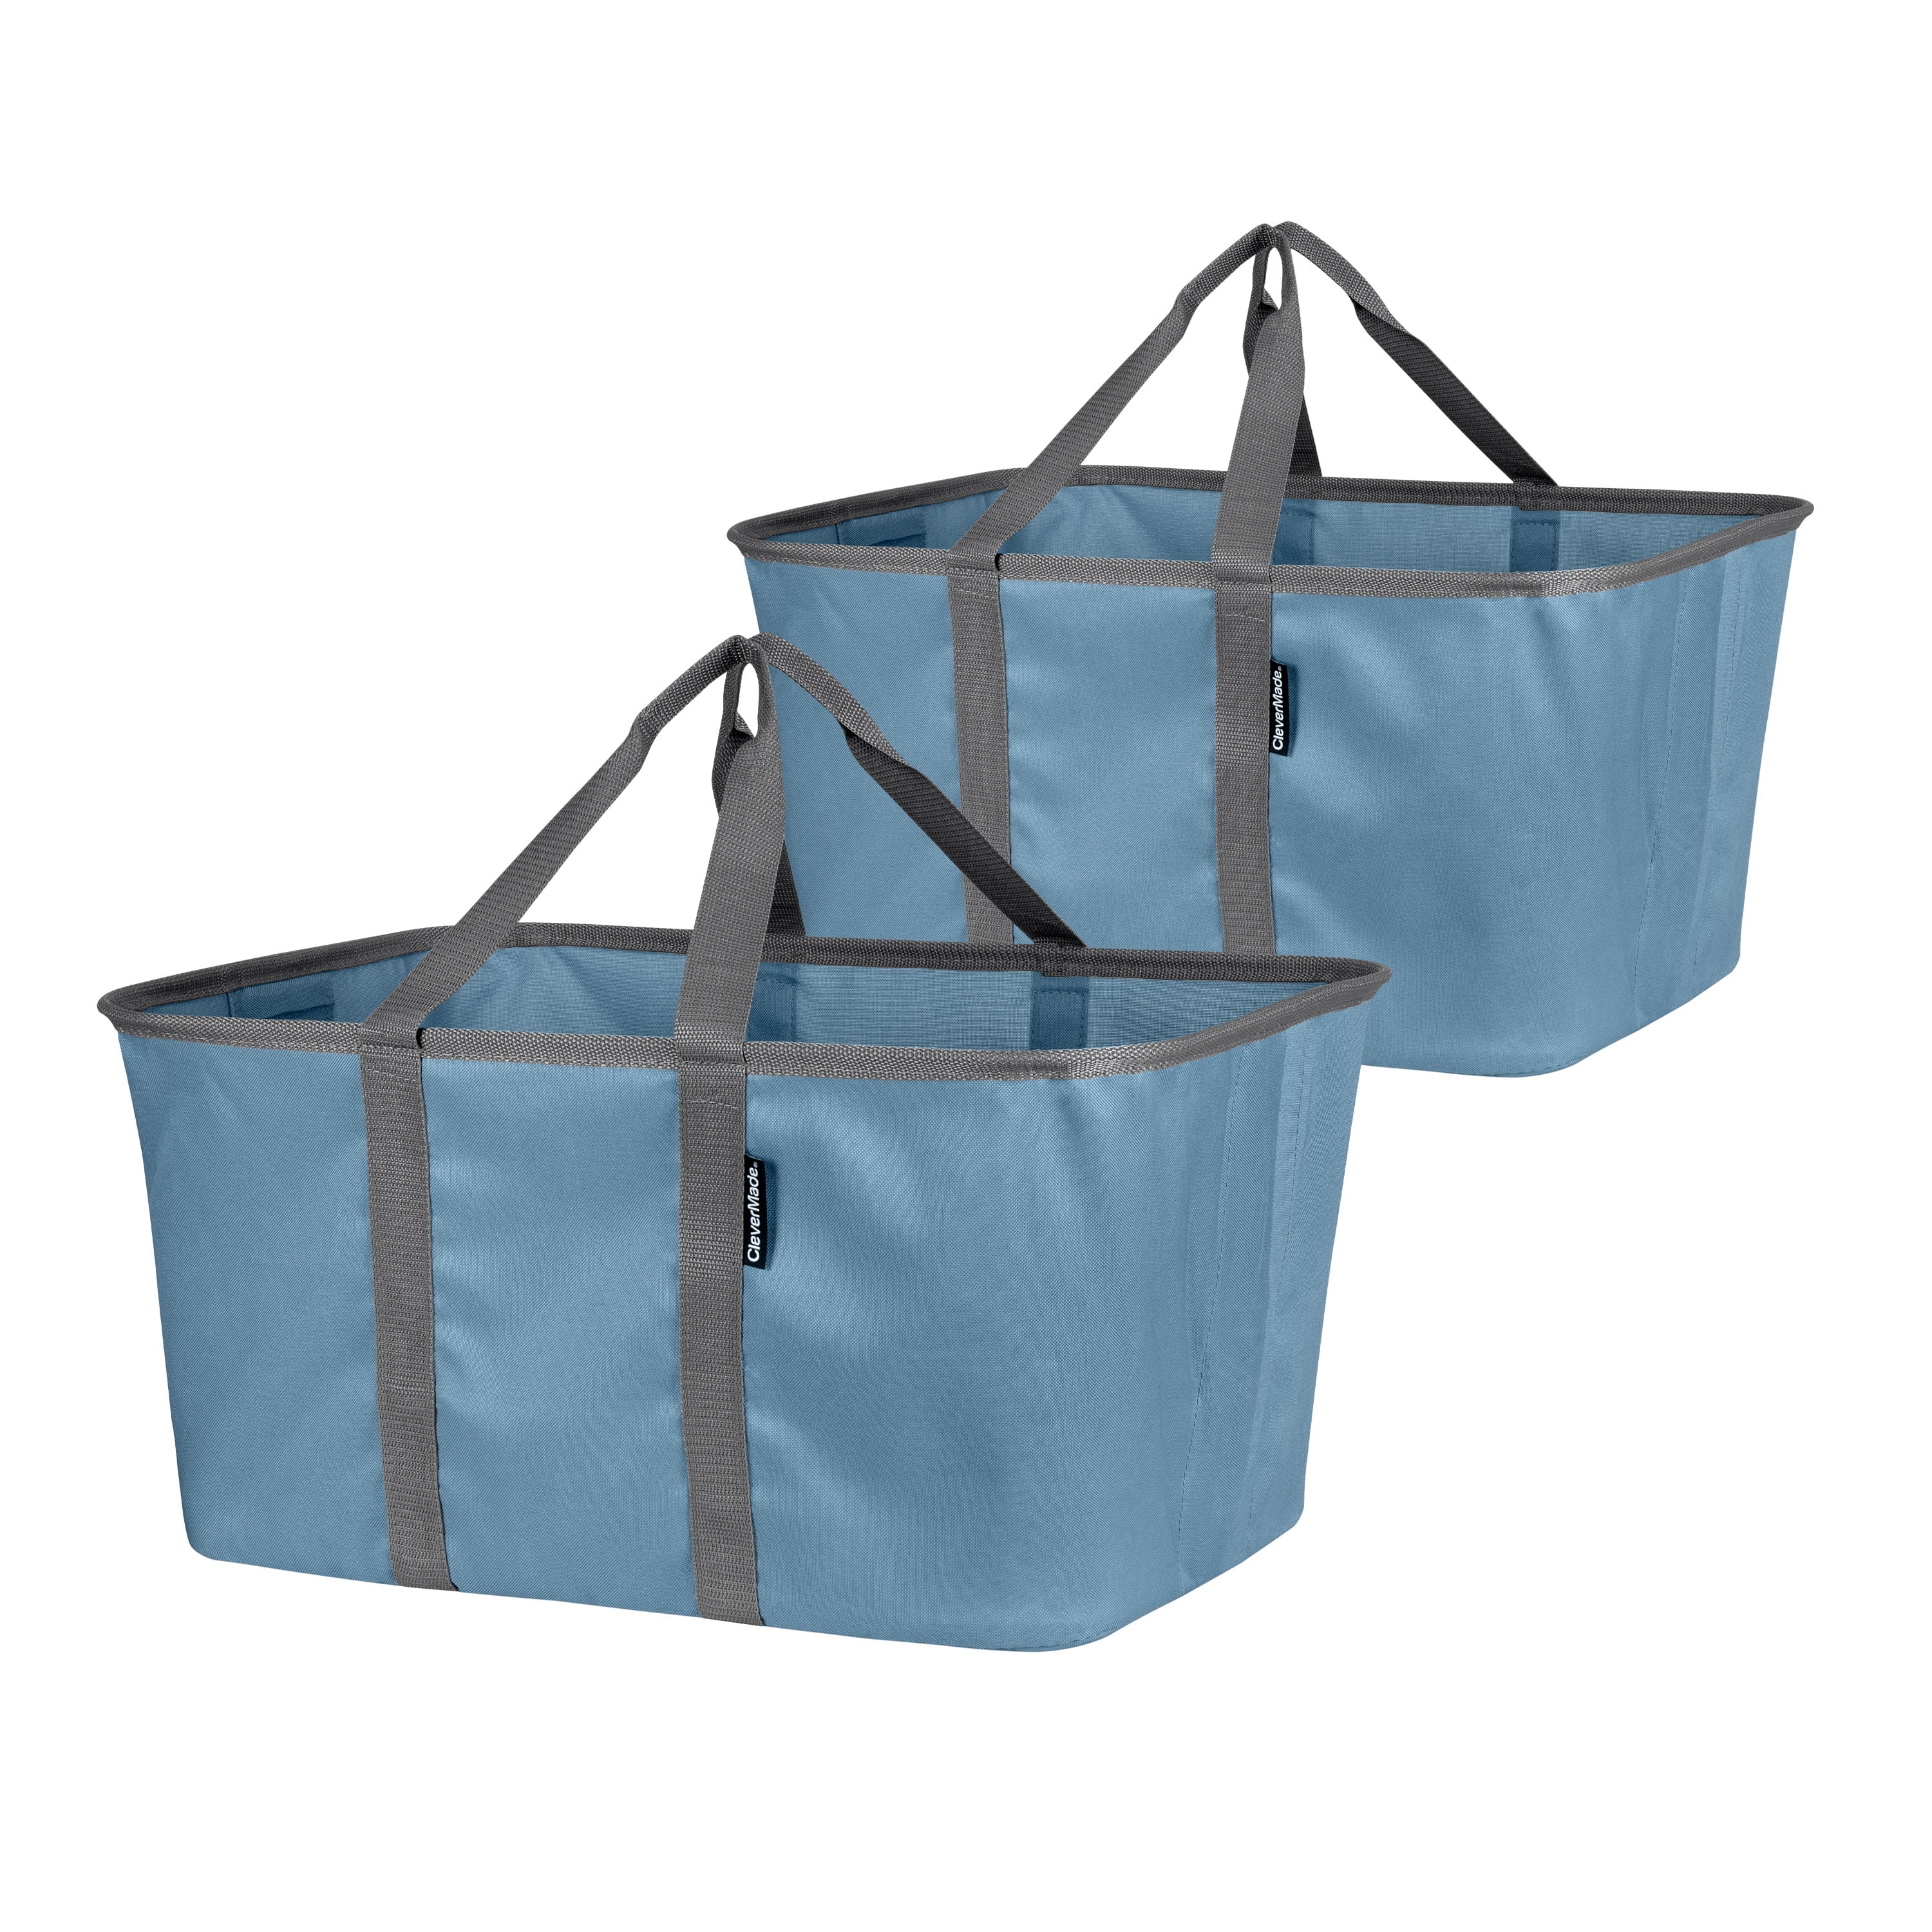 Coloch 2 Pack 16L/4.2 Gallon Collapsible Plastic Bucket, Foldable Mop  Bucket Laundry Basket with Han…See more Coloch 2 Pack 16L/4.2 Gallon  Collapsible